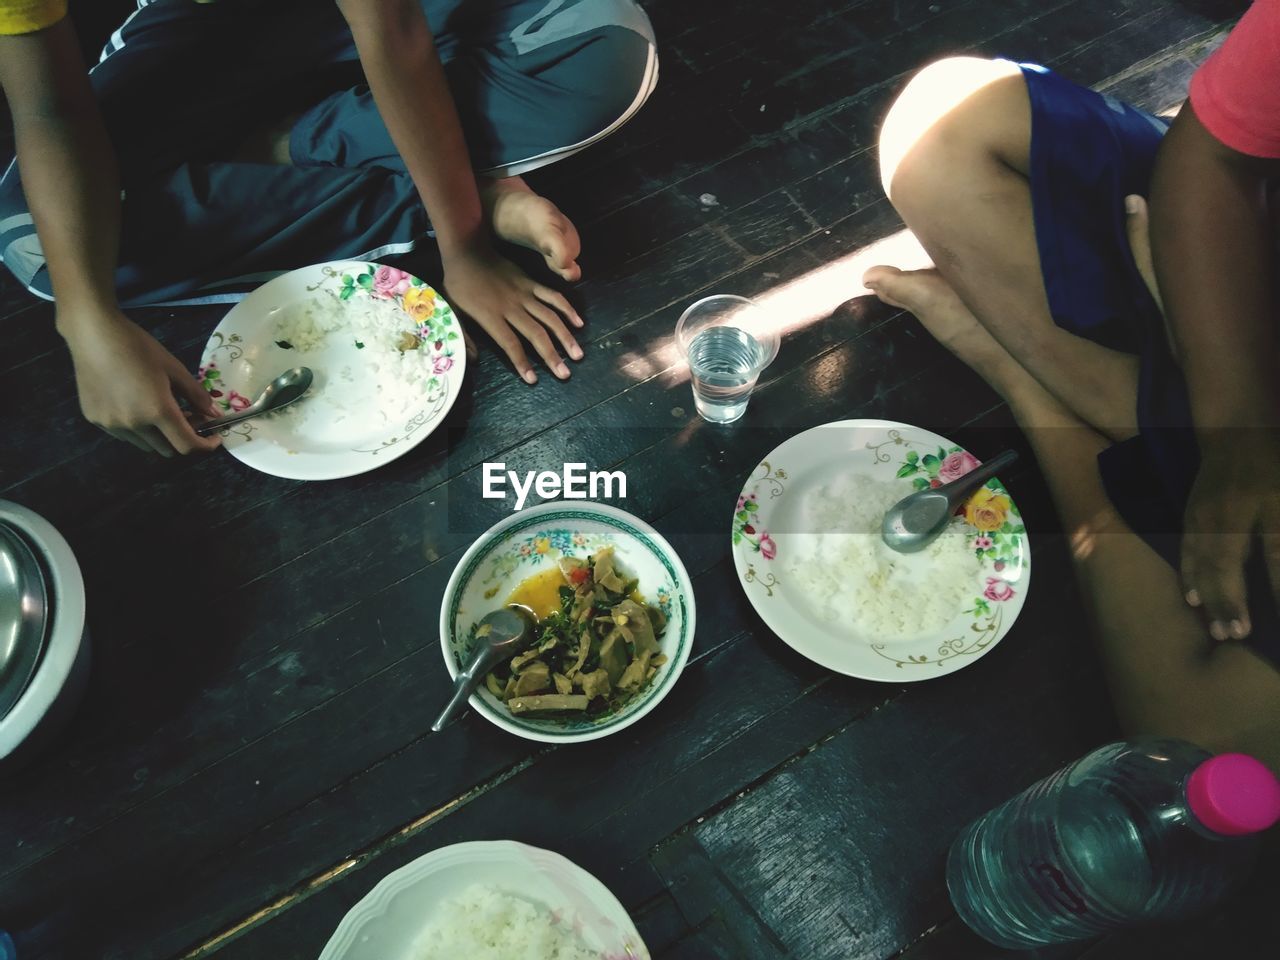 HIGH ANGLE VIEW OF PEOPLE HAVING FOOD IN PLATE